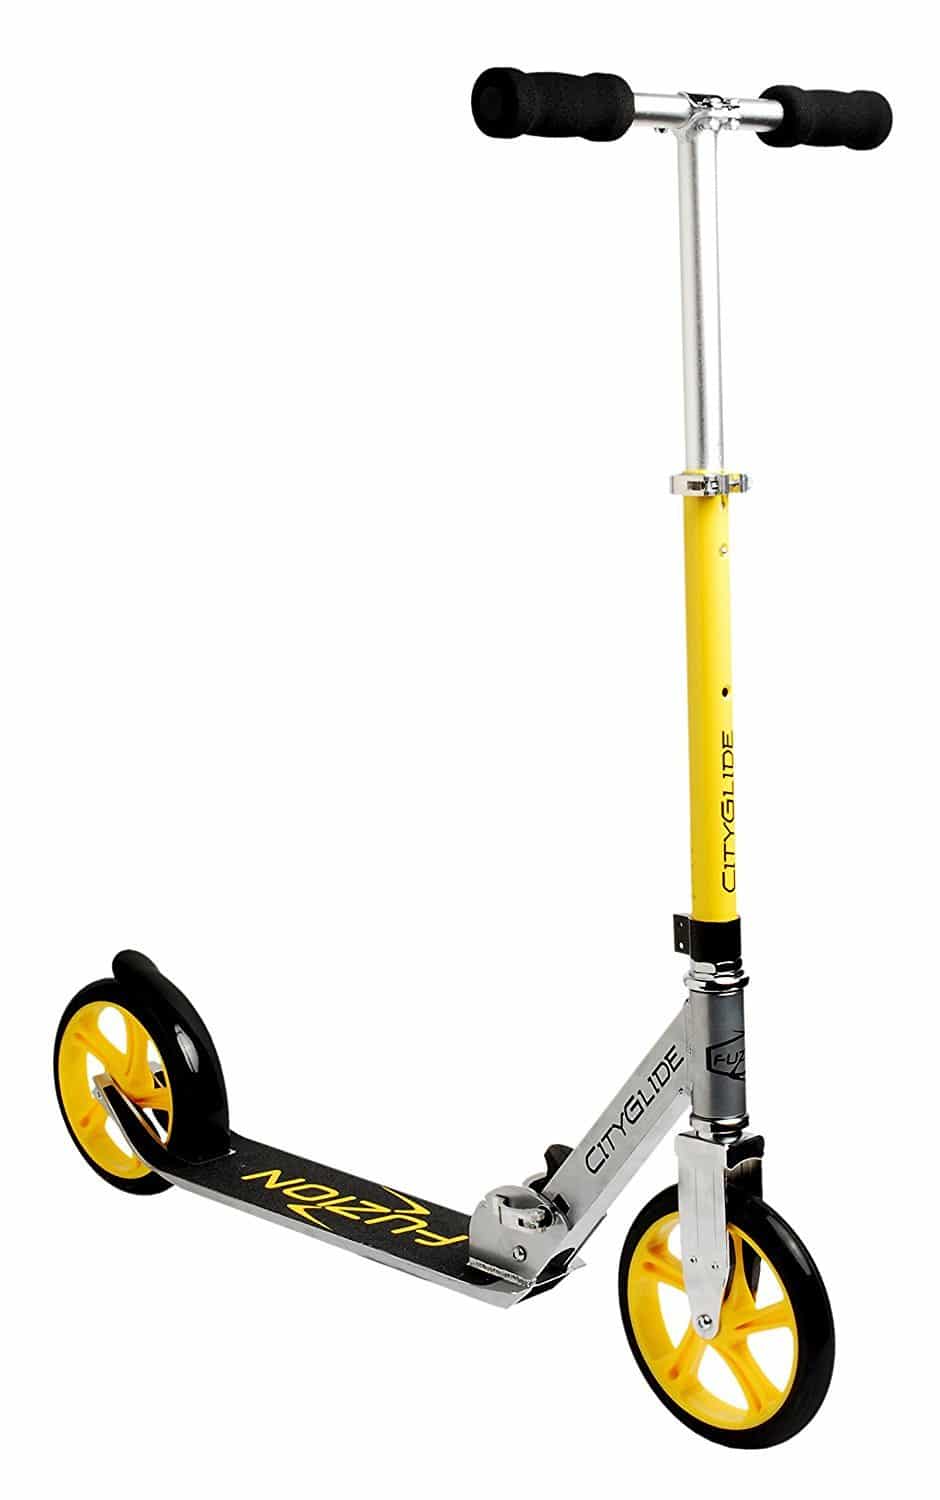 Fuzion Cityglide Adult Kick Scooter - 220lb Weight Limit - Folds Down - Adjustable Handle Bars - Smooth & Fast Ride